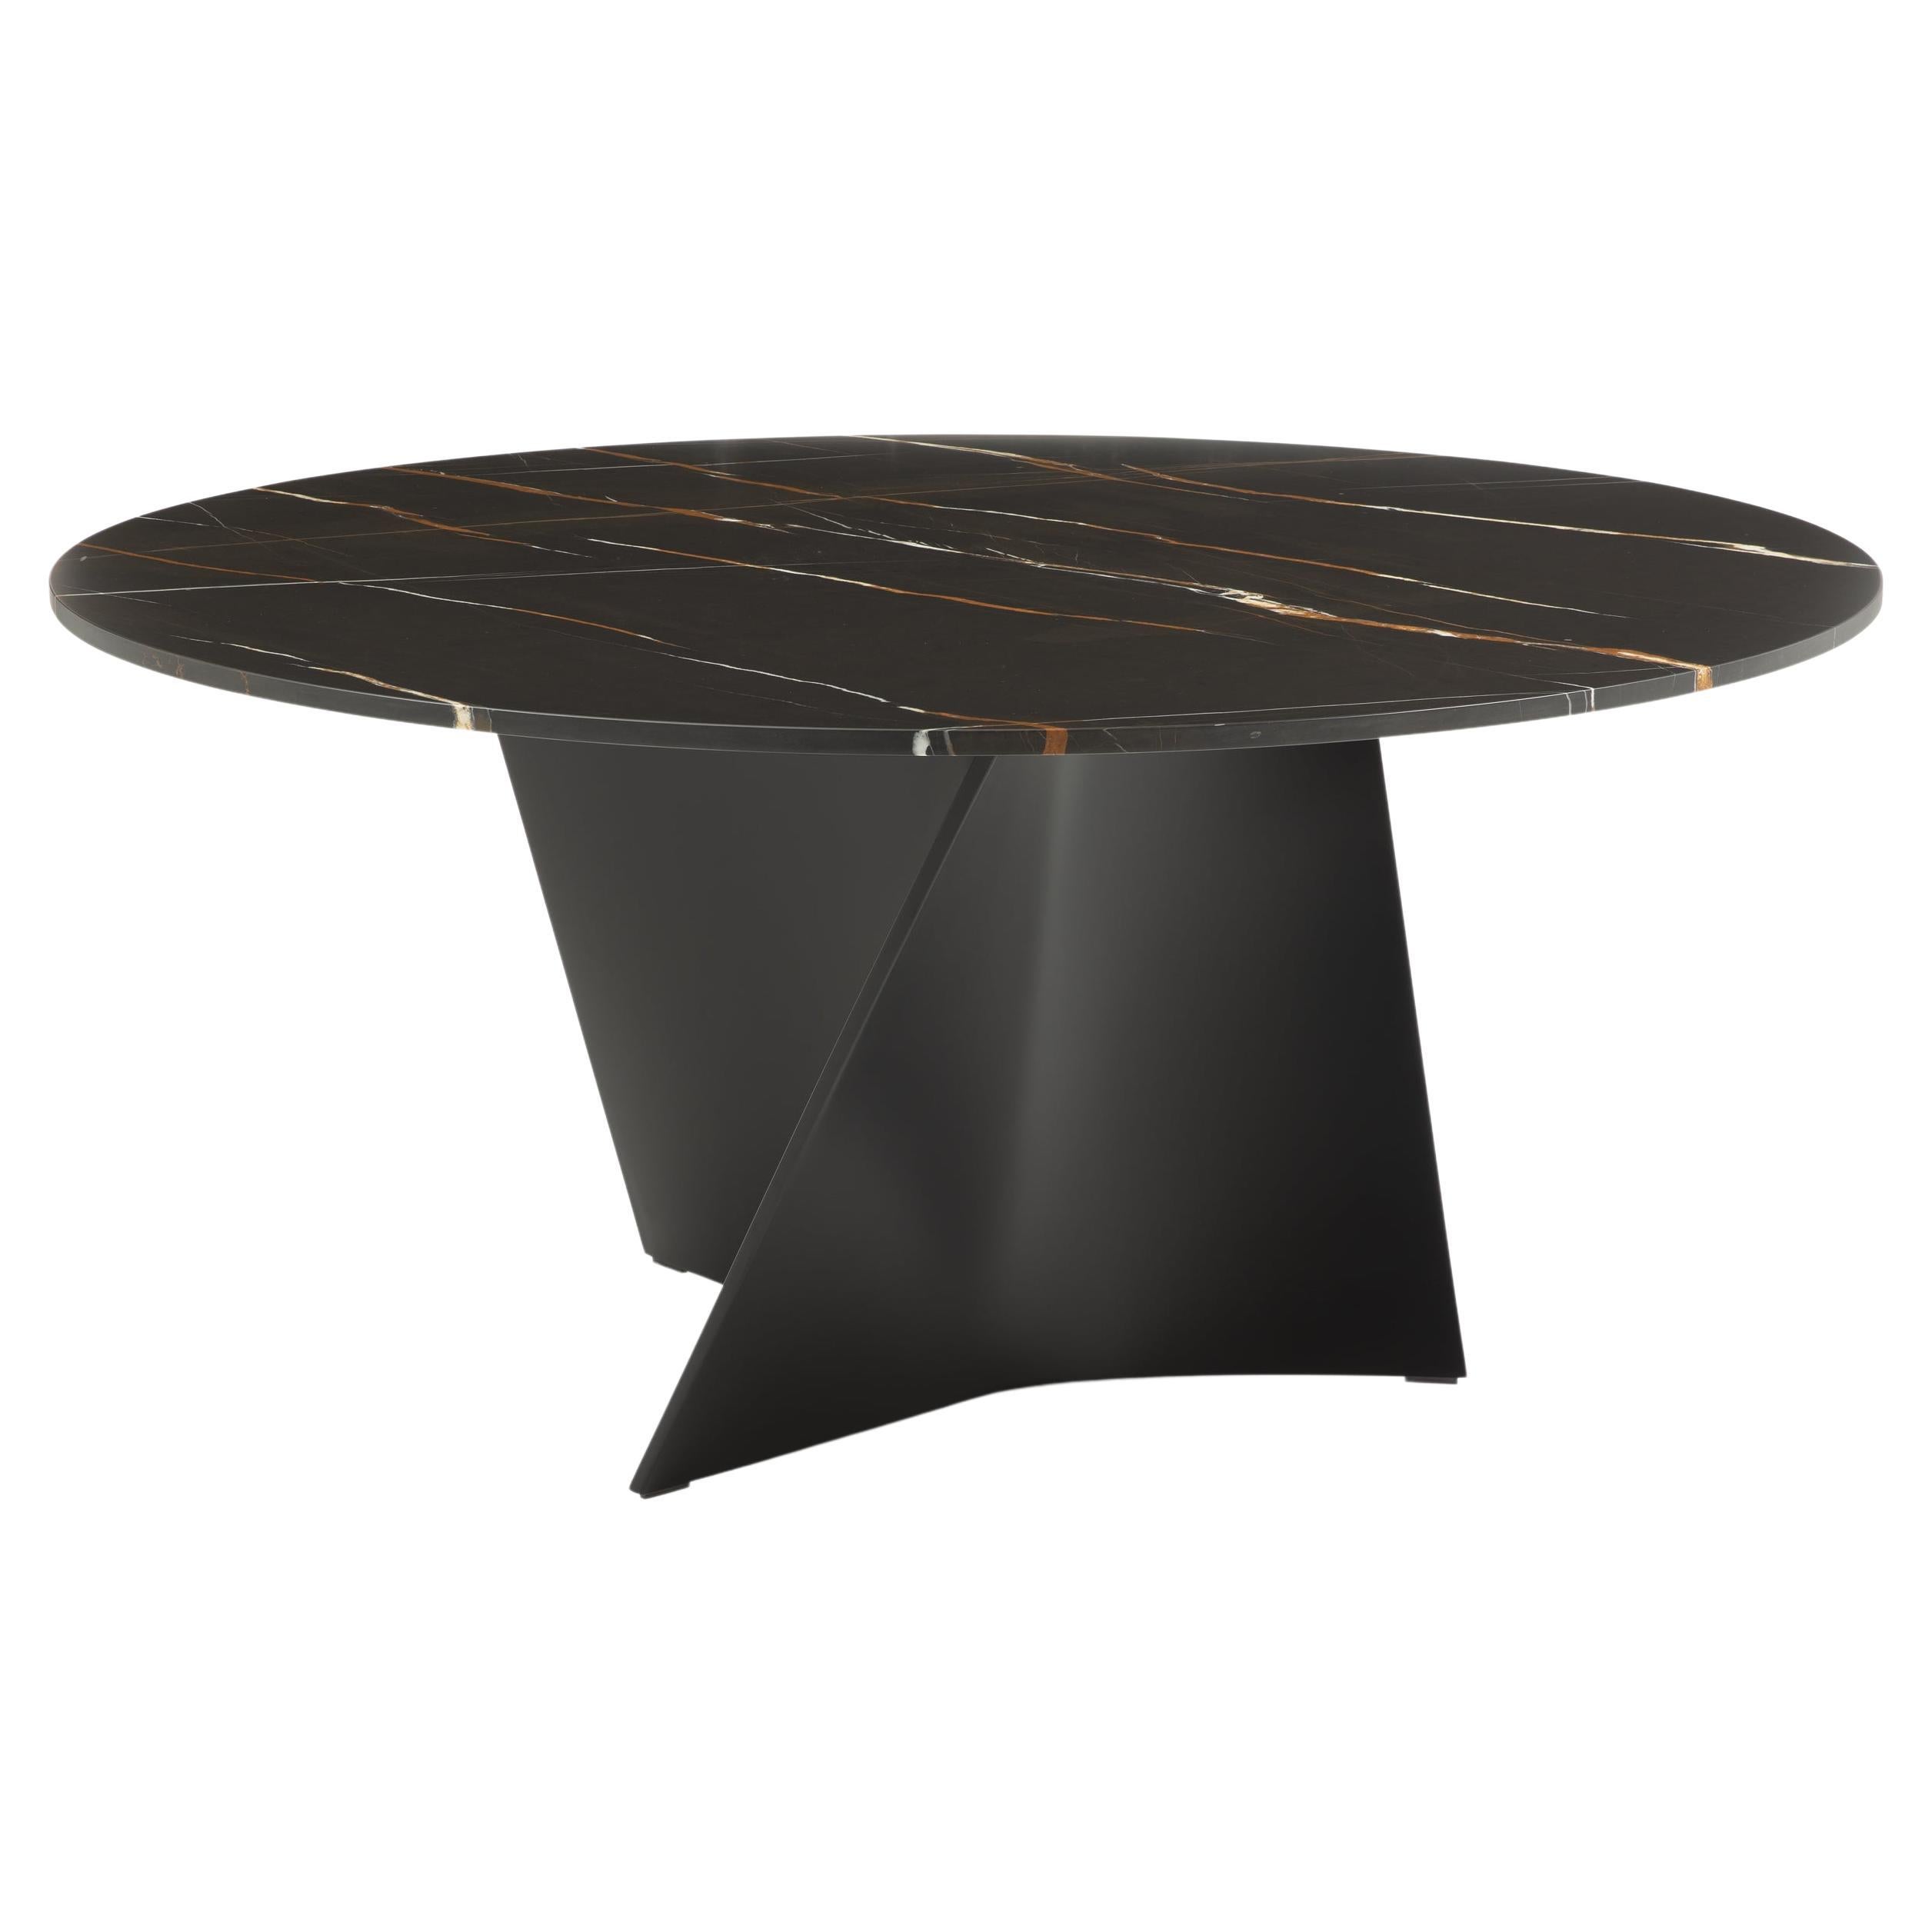 Zanotta Large Elica Table in Sahara Noir Marble Top with Black Frame For Sale